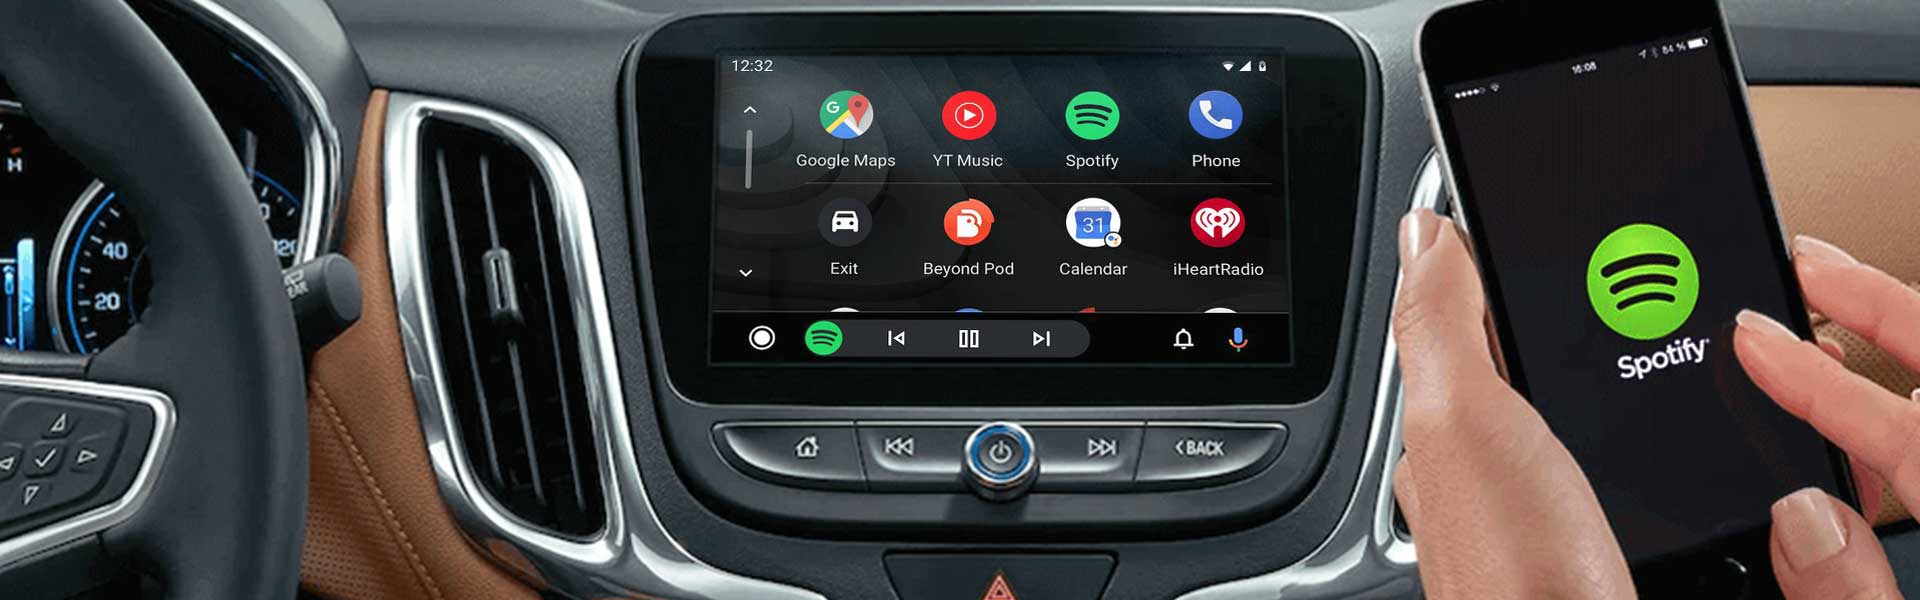 Three car apps for Android phones